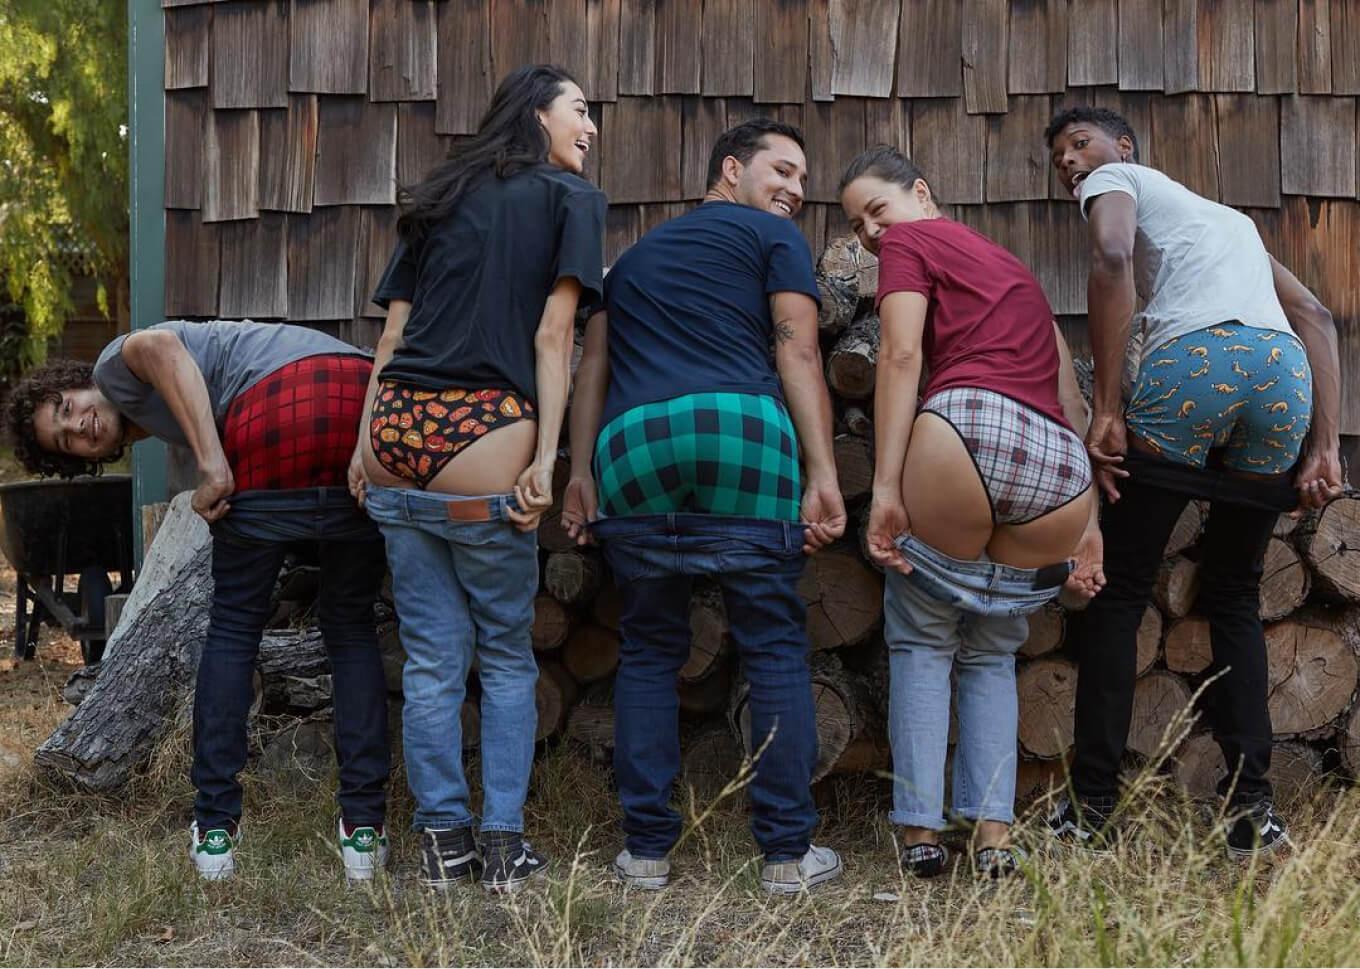 Group of five pulling their pants down to reveal their MeUndies underwear in plaid, gingham and animal patterns